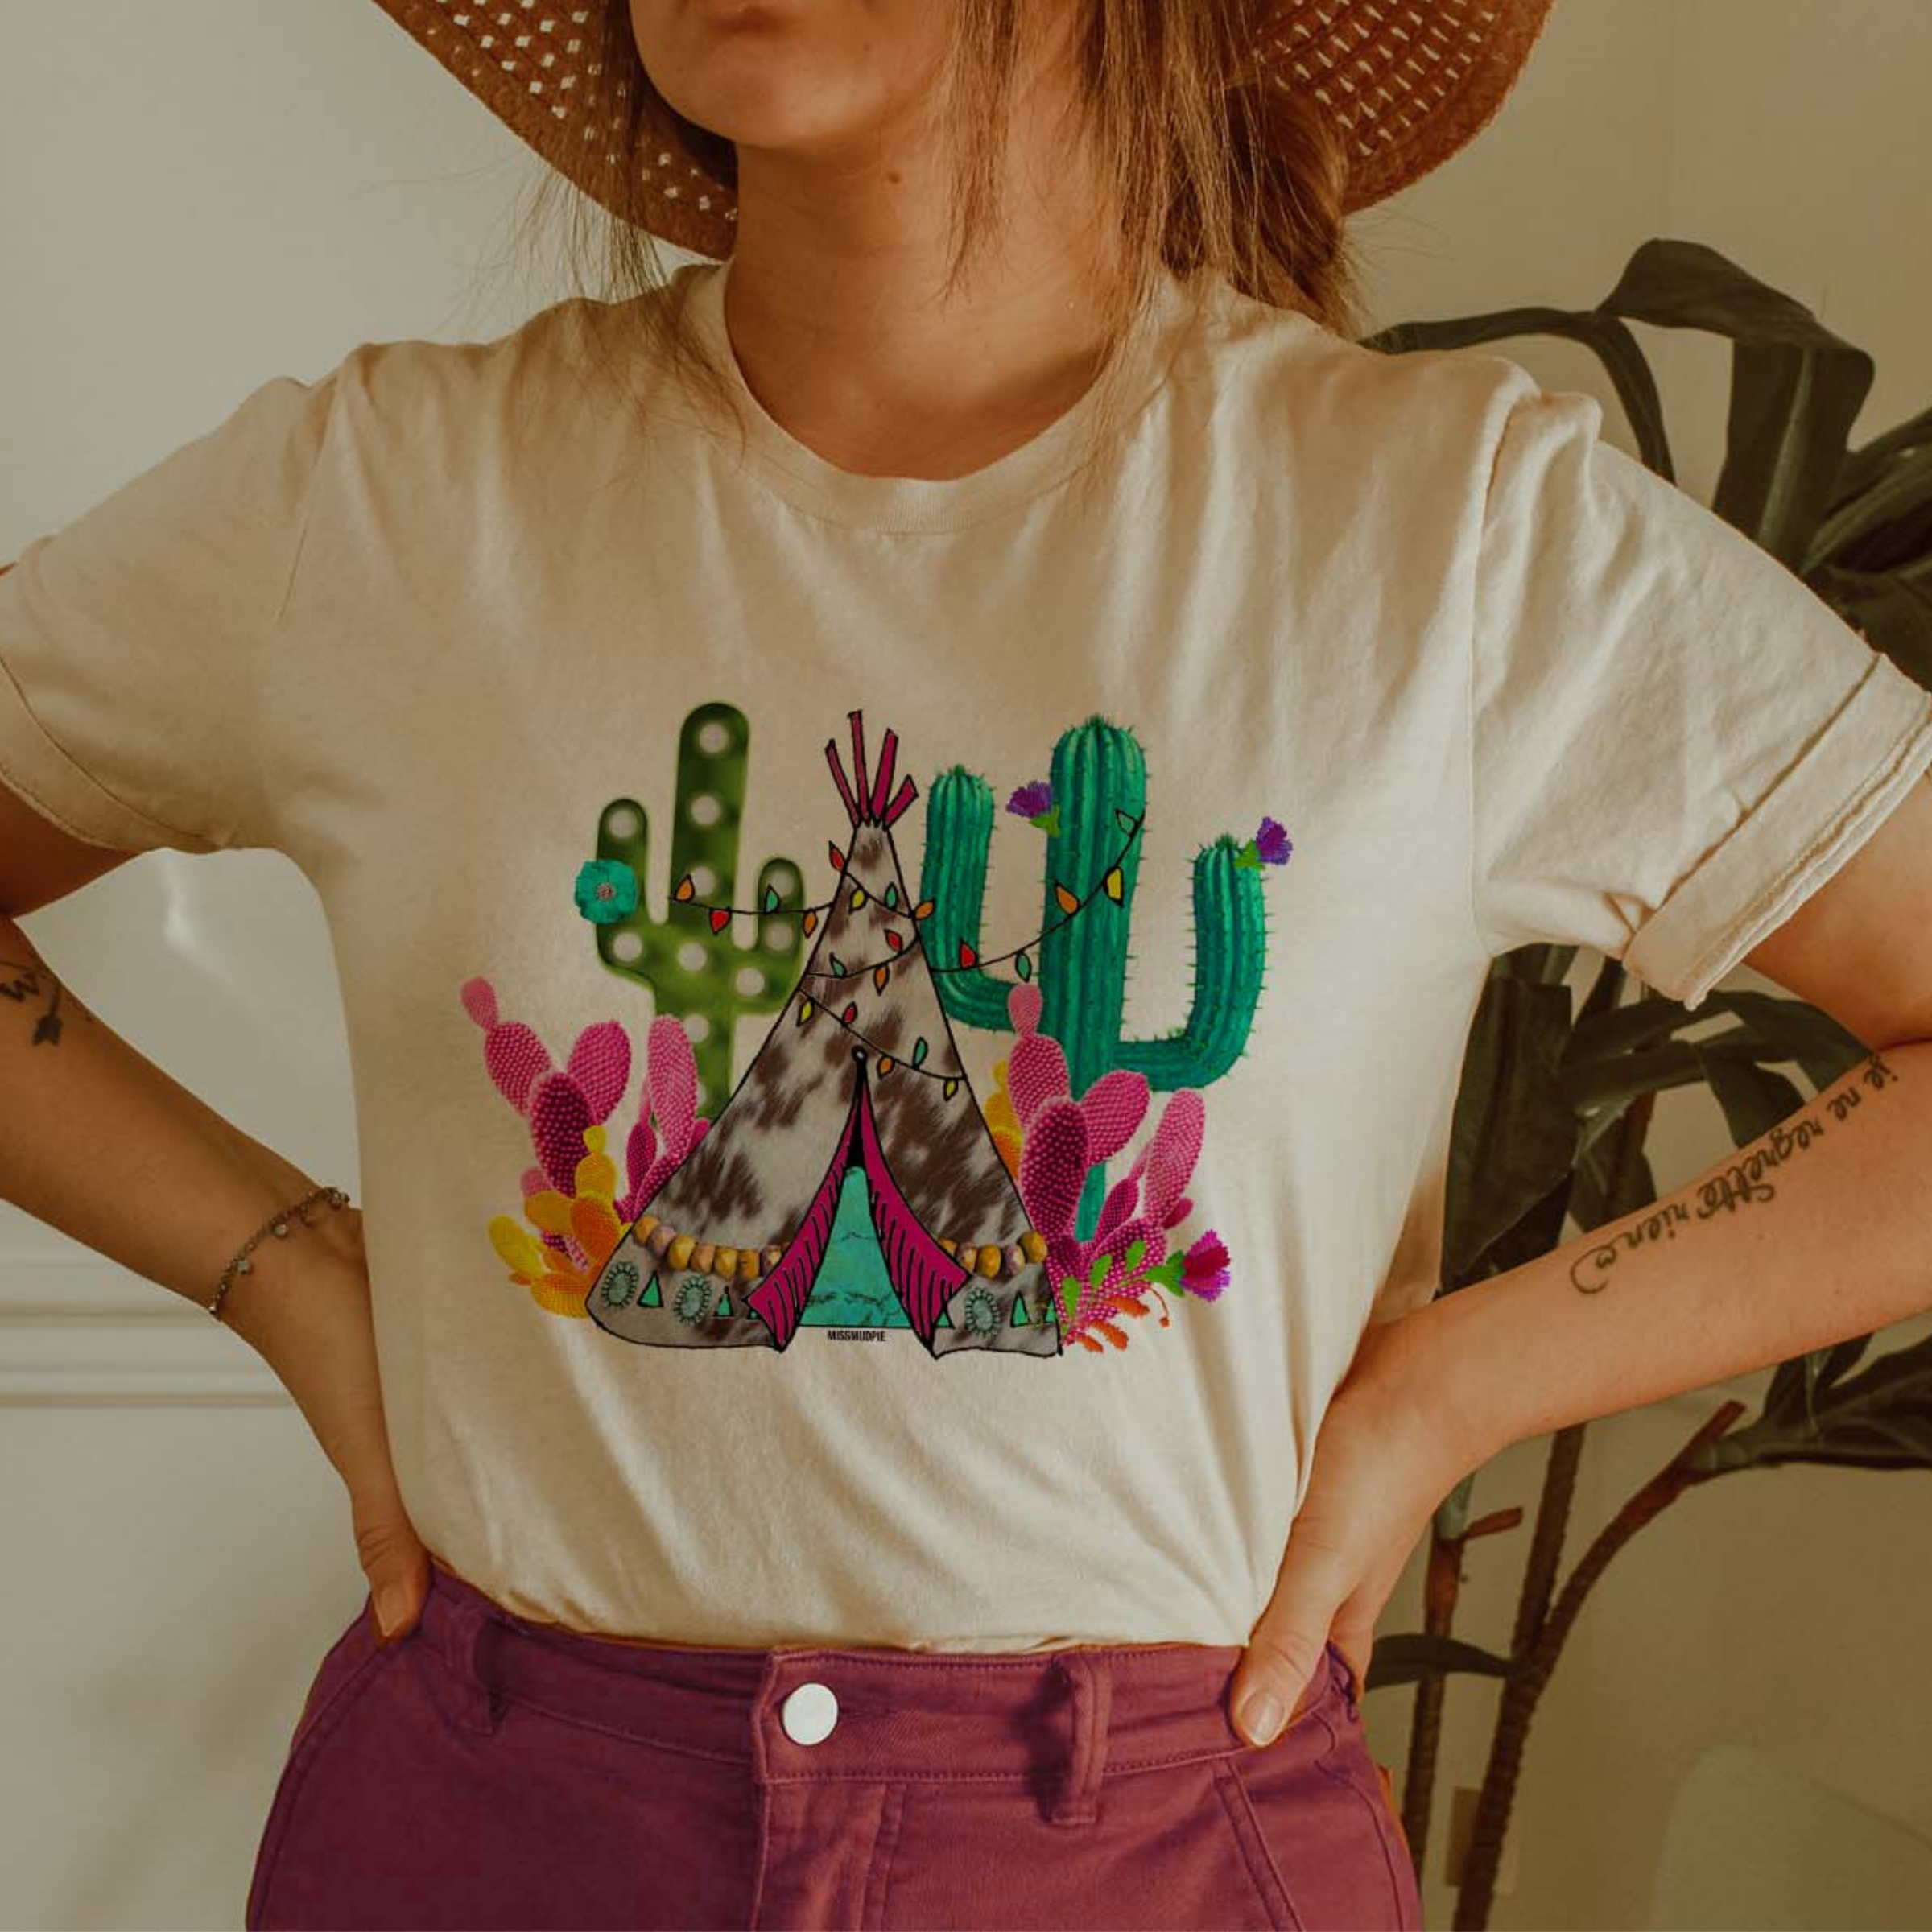 This cream tee includes a crew neckline, short sleeves, and a teepee and cactus graphic in bright, fun colors. The model is shown here wearing the tee with rolled sleeves, a light straw hat, silver bracelet, and fuchsia pair of denim jeans. 